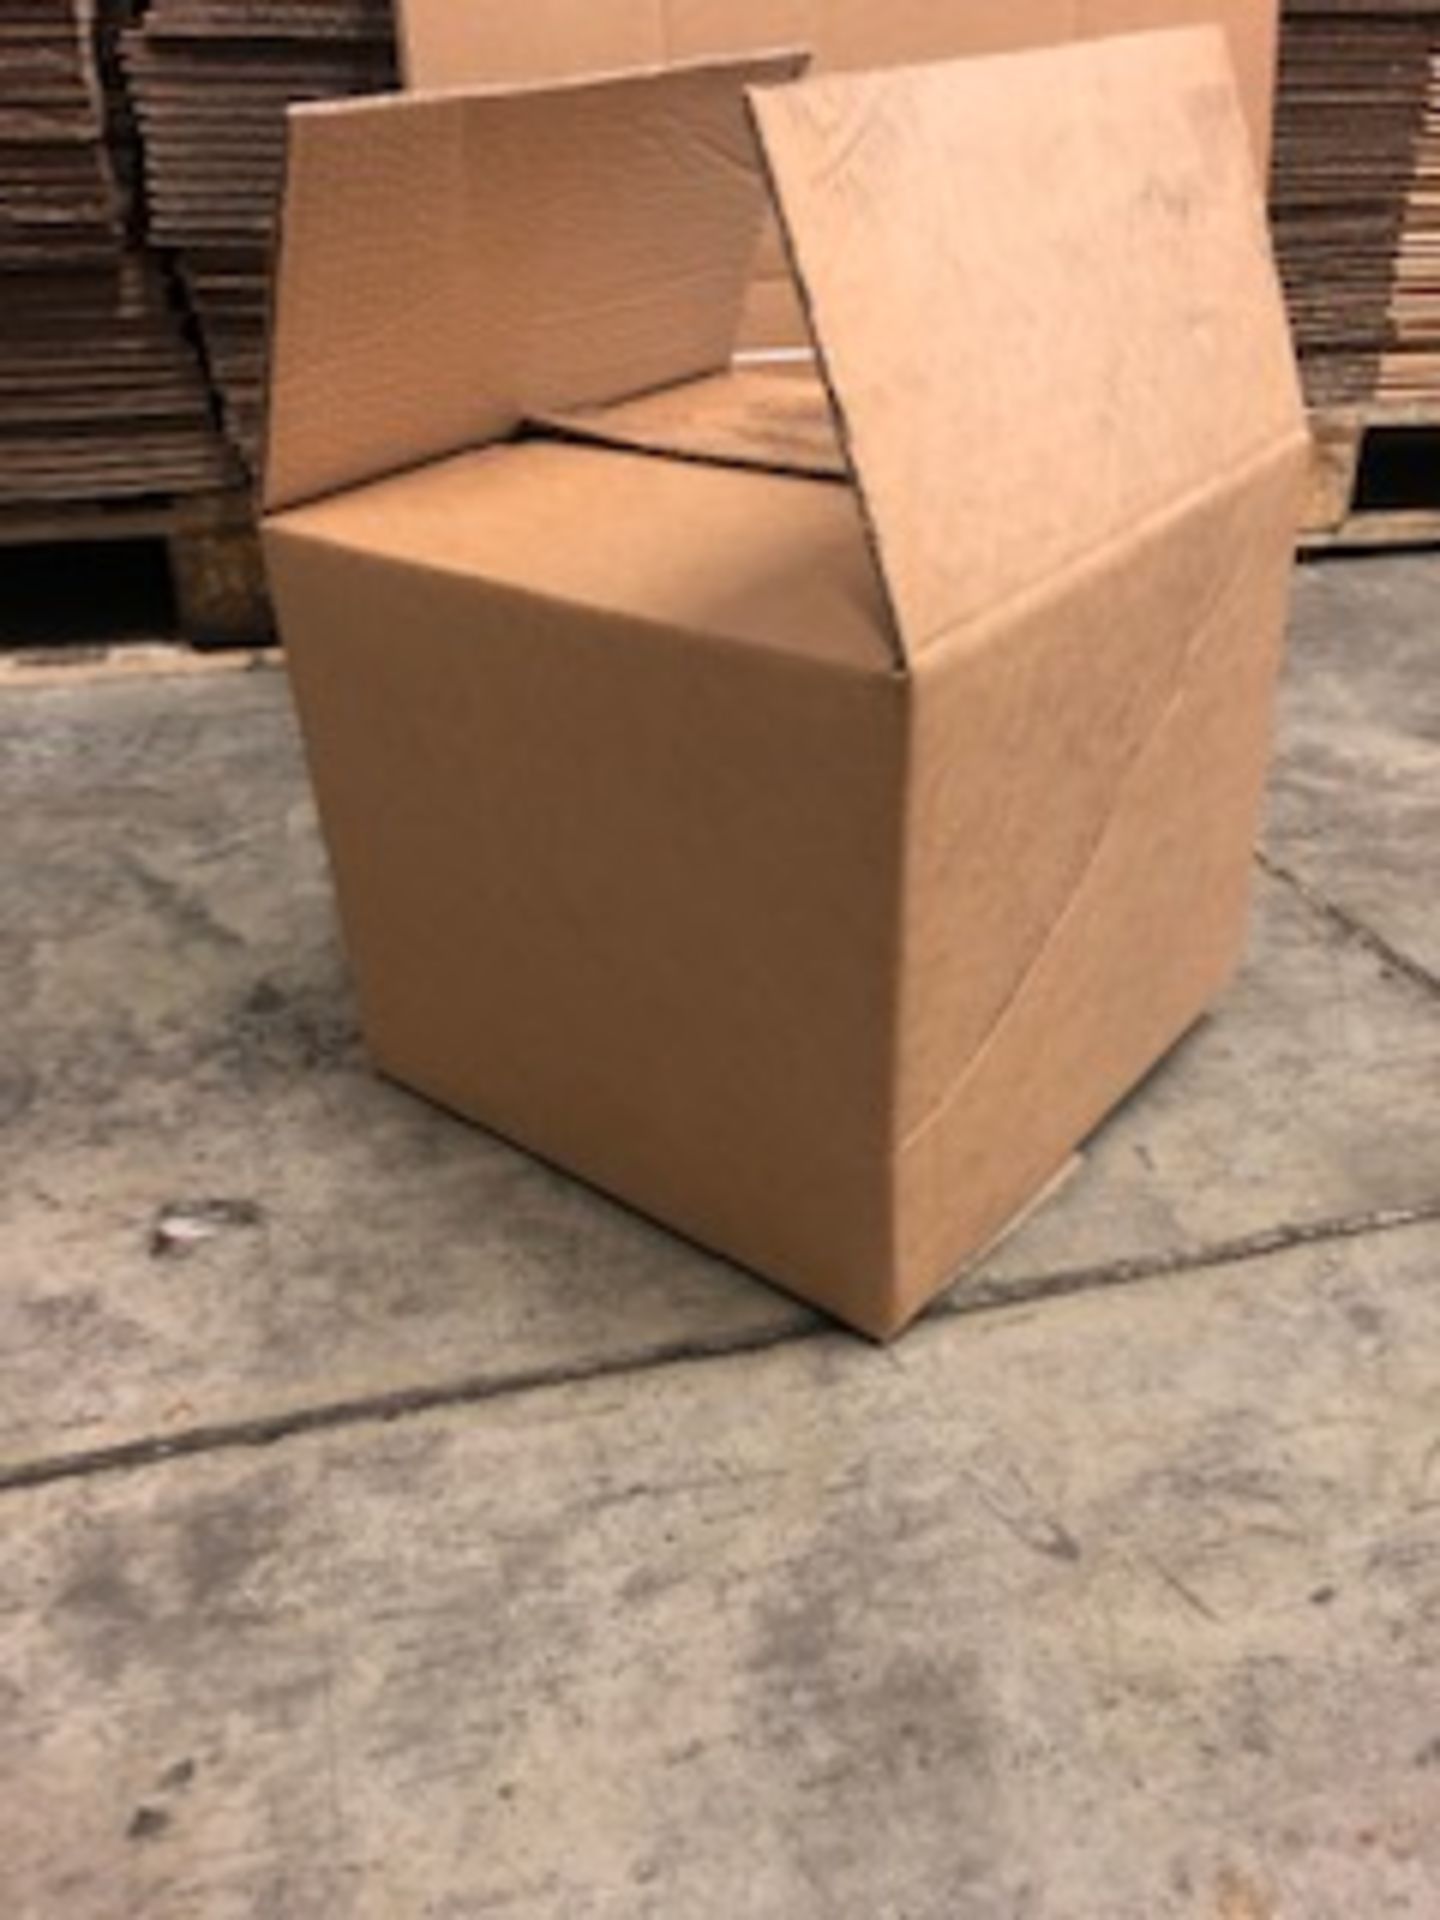 50 x Flat Packed Cardboard Boxes - L30xW30xH28cm (New)